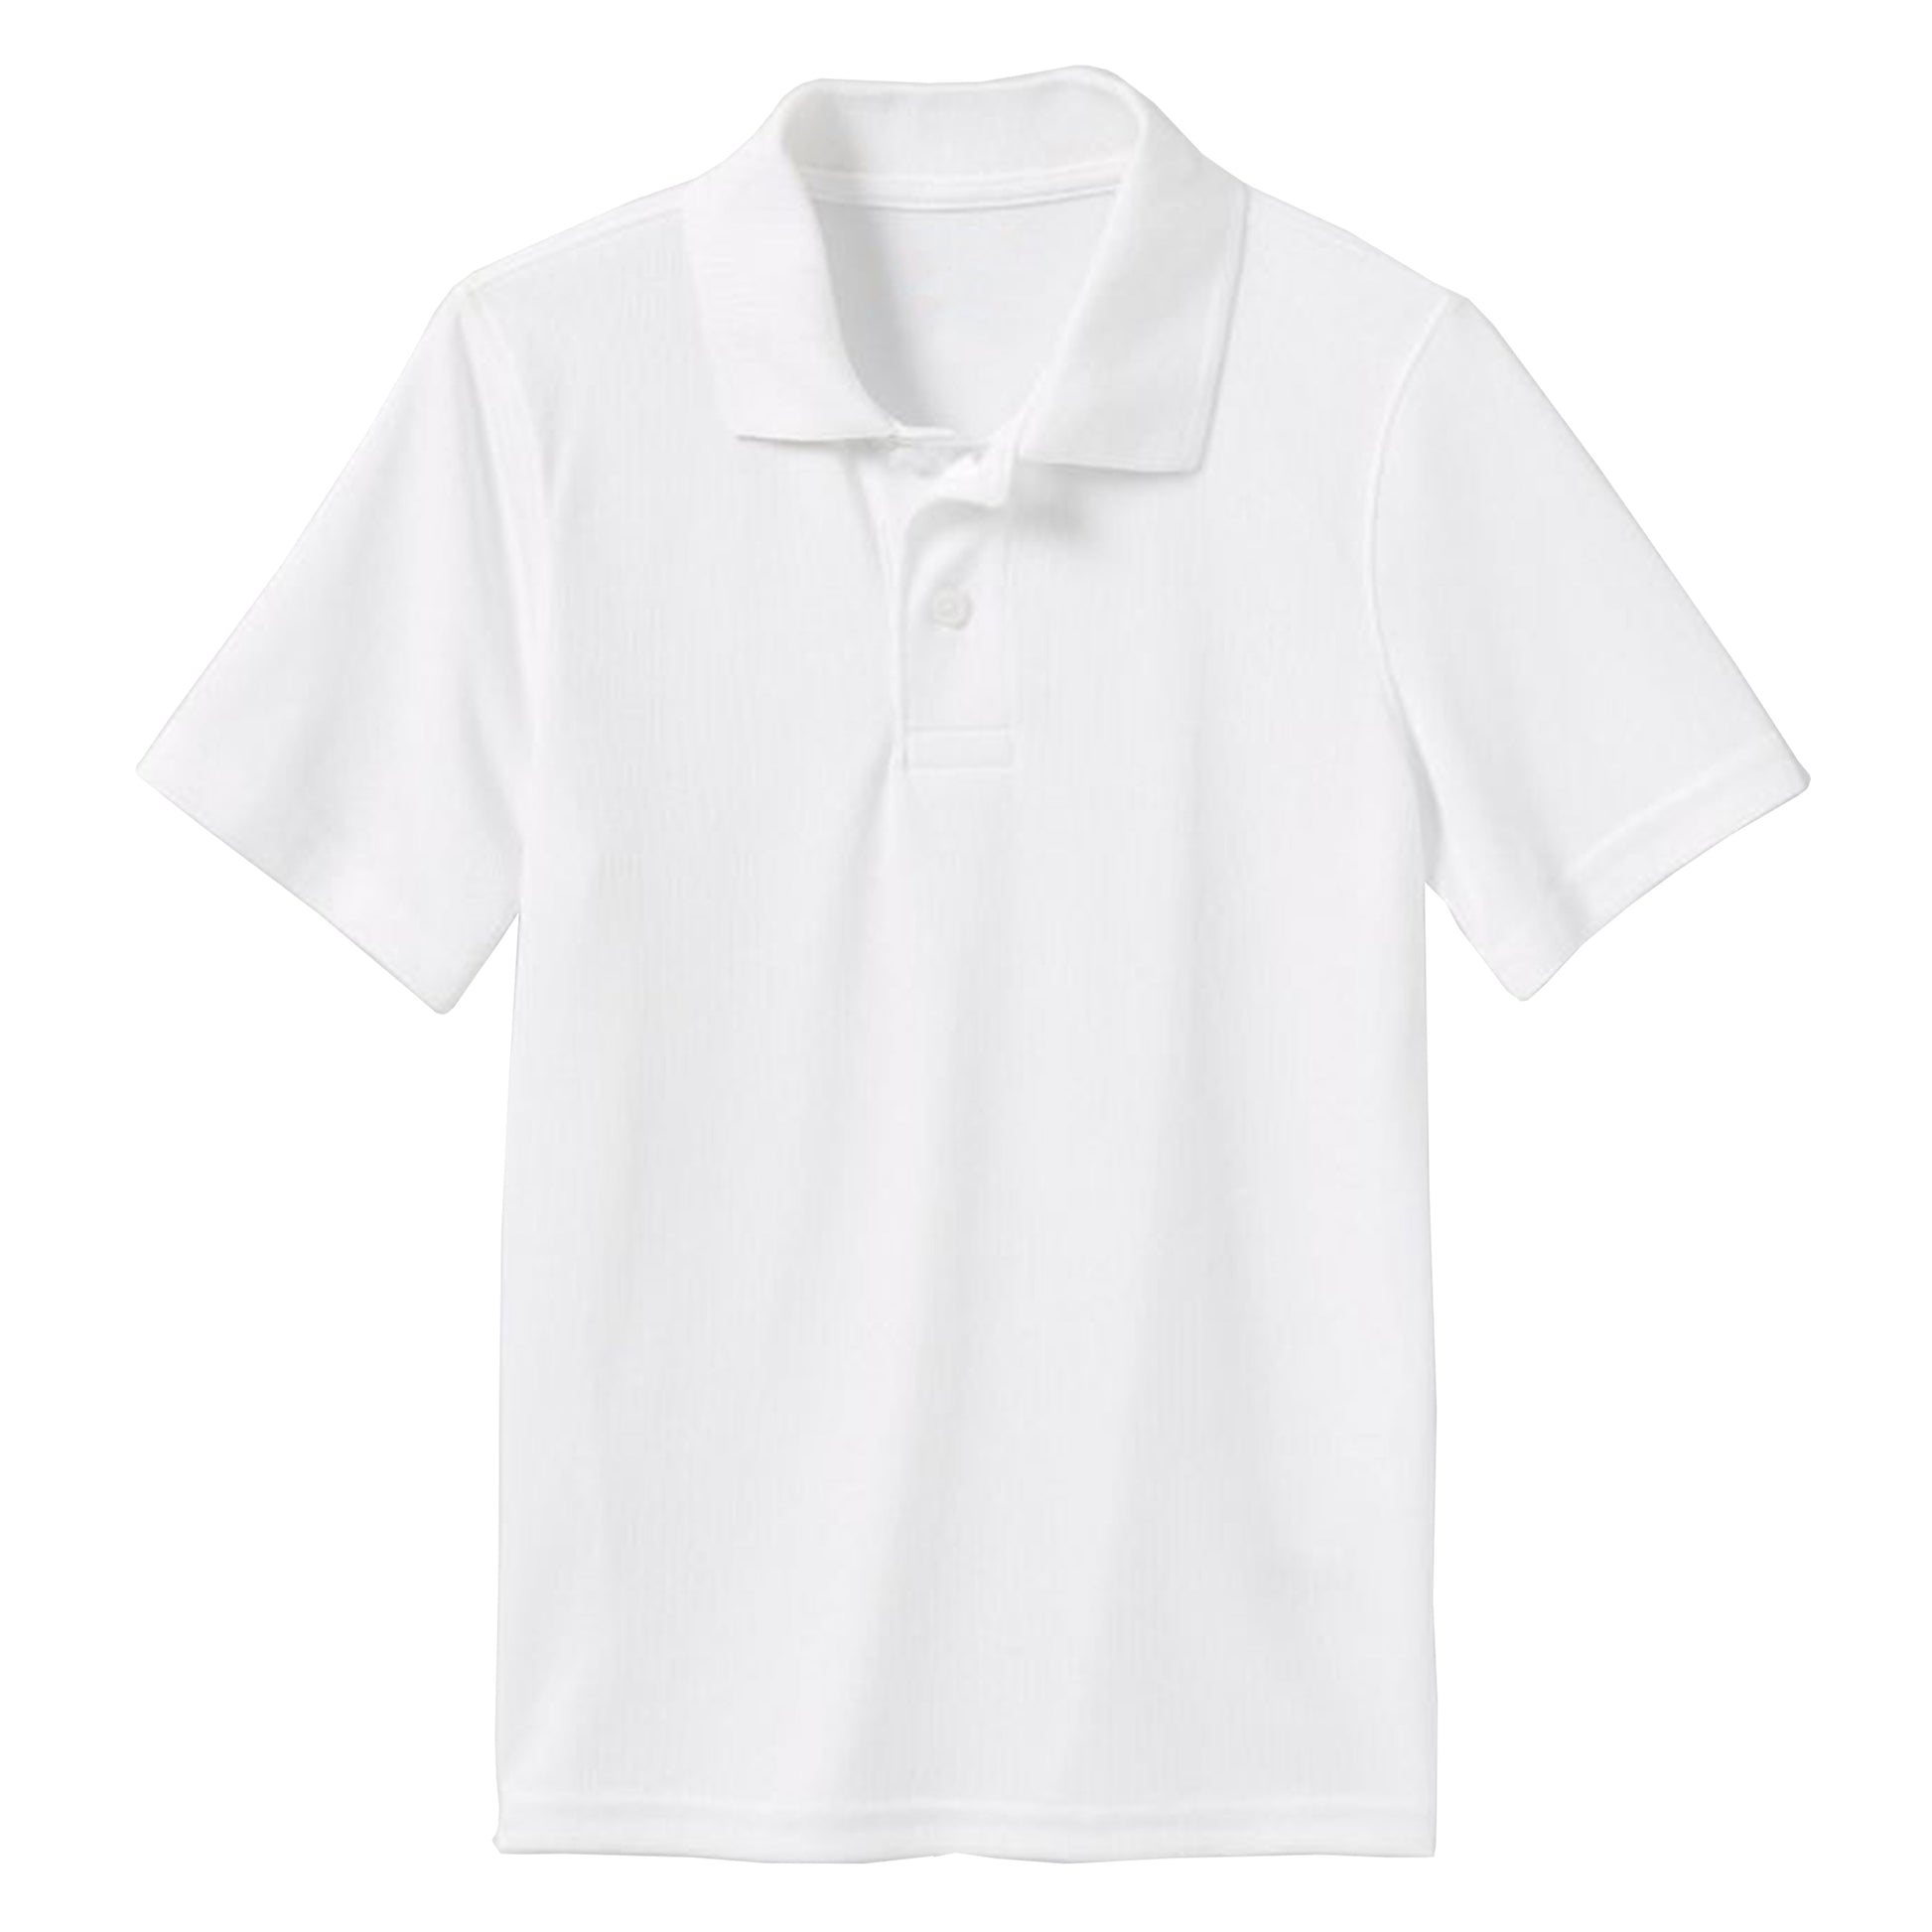 Children & Boy's Short Sleeve Moisture Wicking Polo Shirts (Sizes, 4 to 20) - GalaxybyHarvic